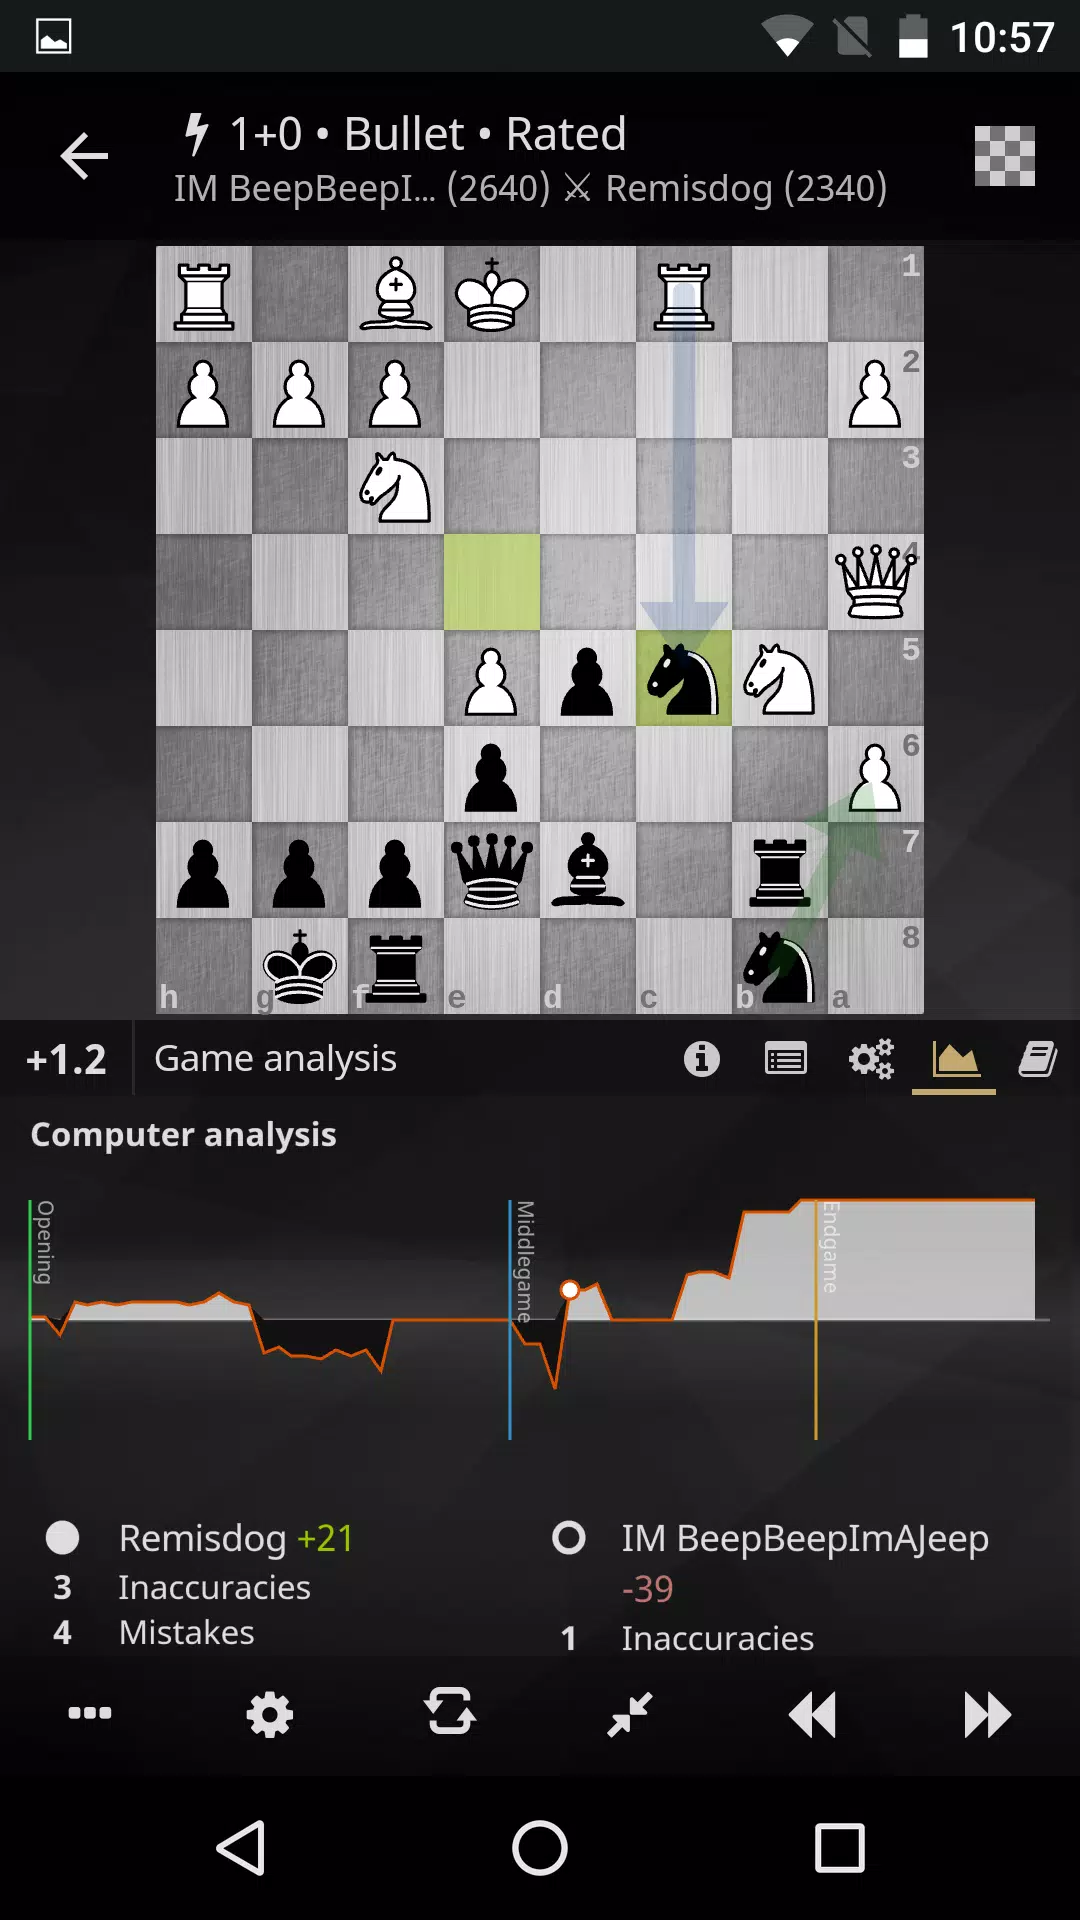 lichess • Free Online Chess Apk Download for Android- Latest version 8.0.0-  org.lichess.mobileapp